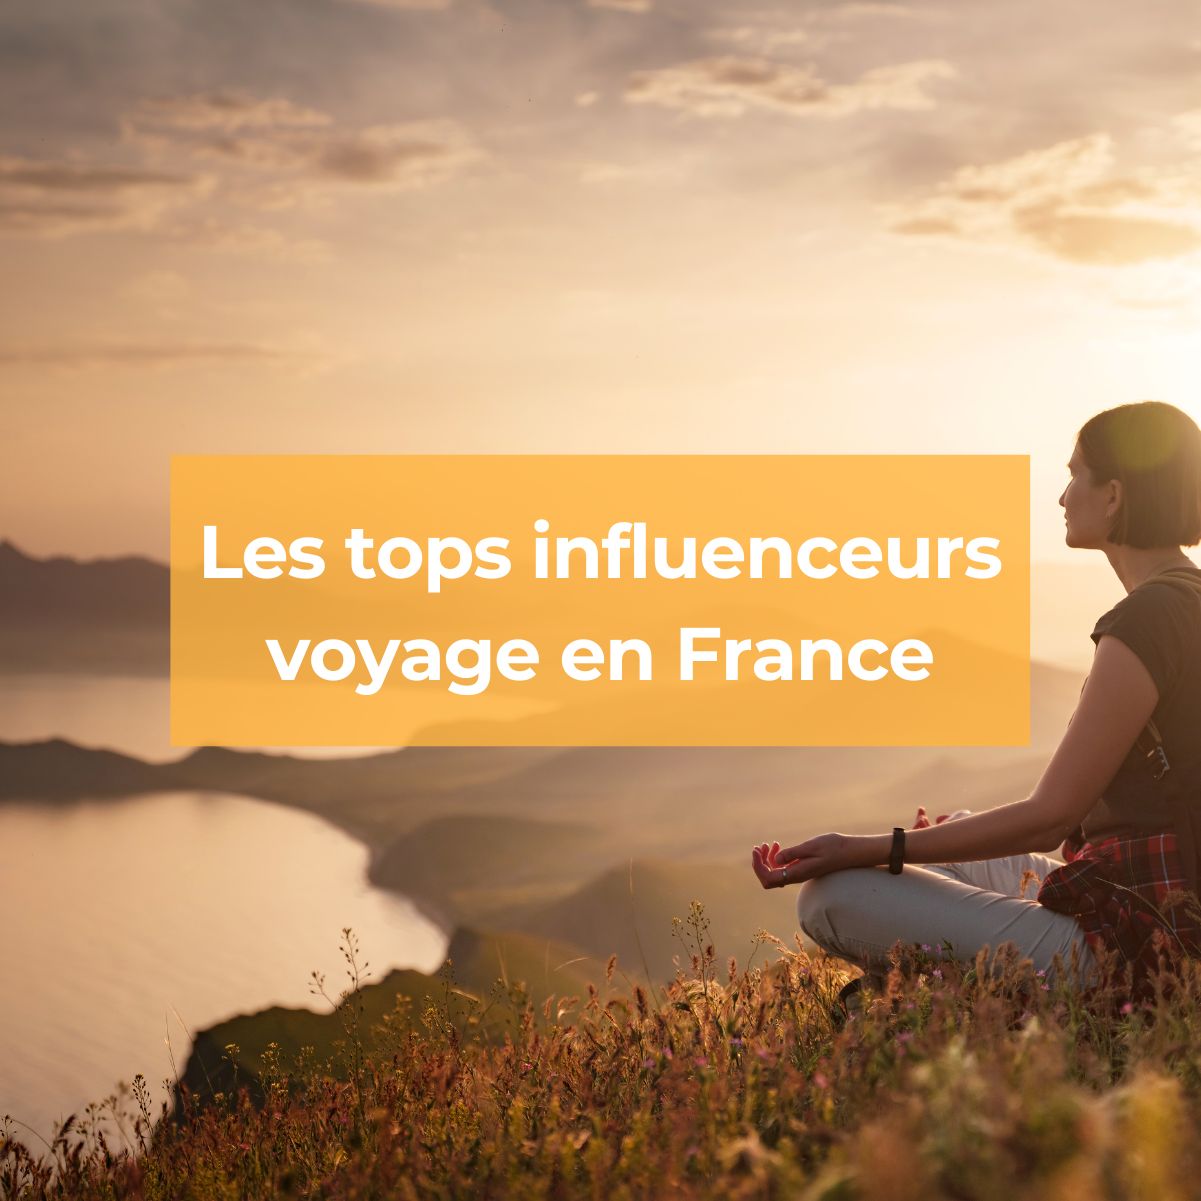 Who are the top travel influencers in France?